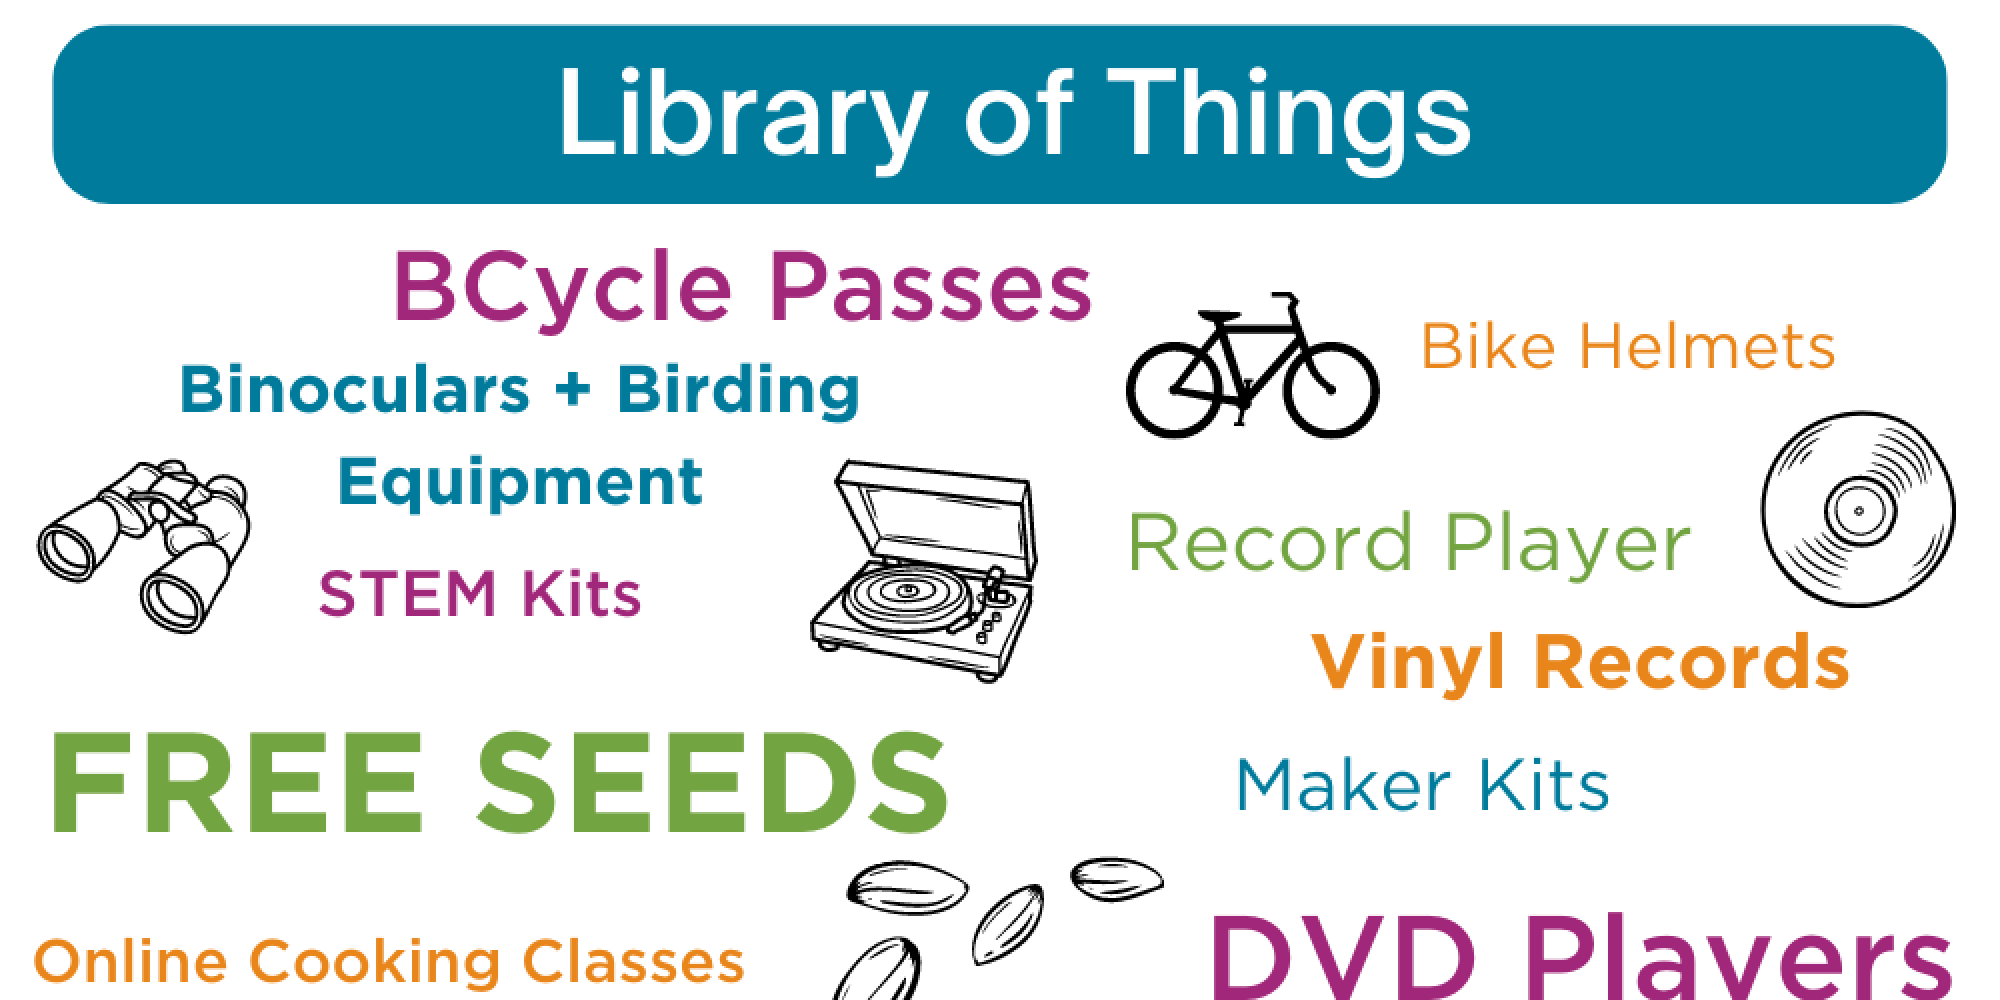 Madison Public Library's Library of Things